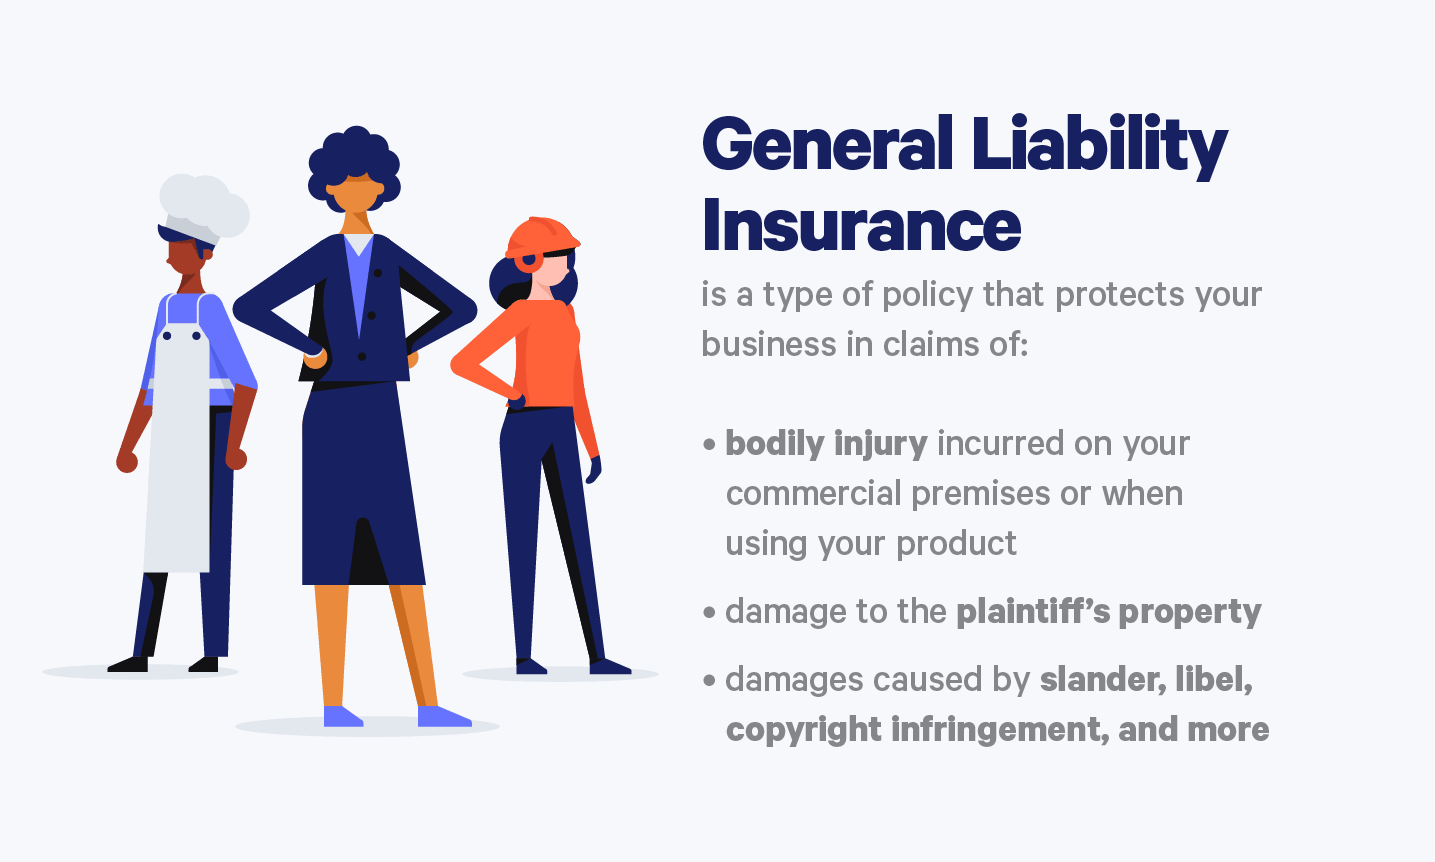 What is covered by liability insurance?